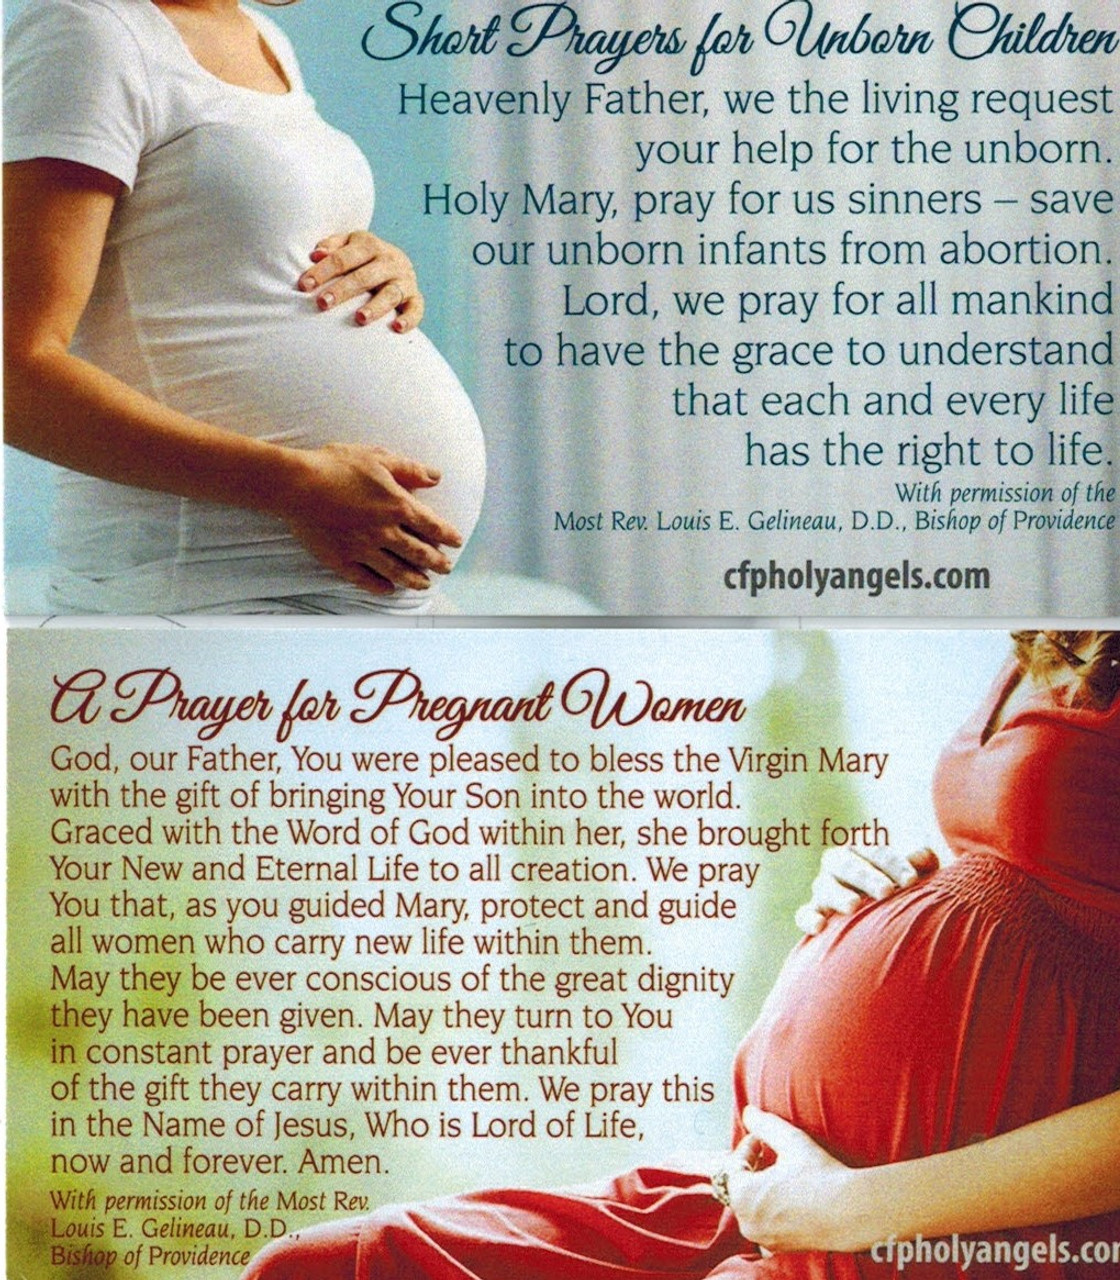 Love Them Both Prolife Life Double Sided Prayer Card--prayer for unborn babies and pregnant women